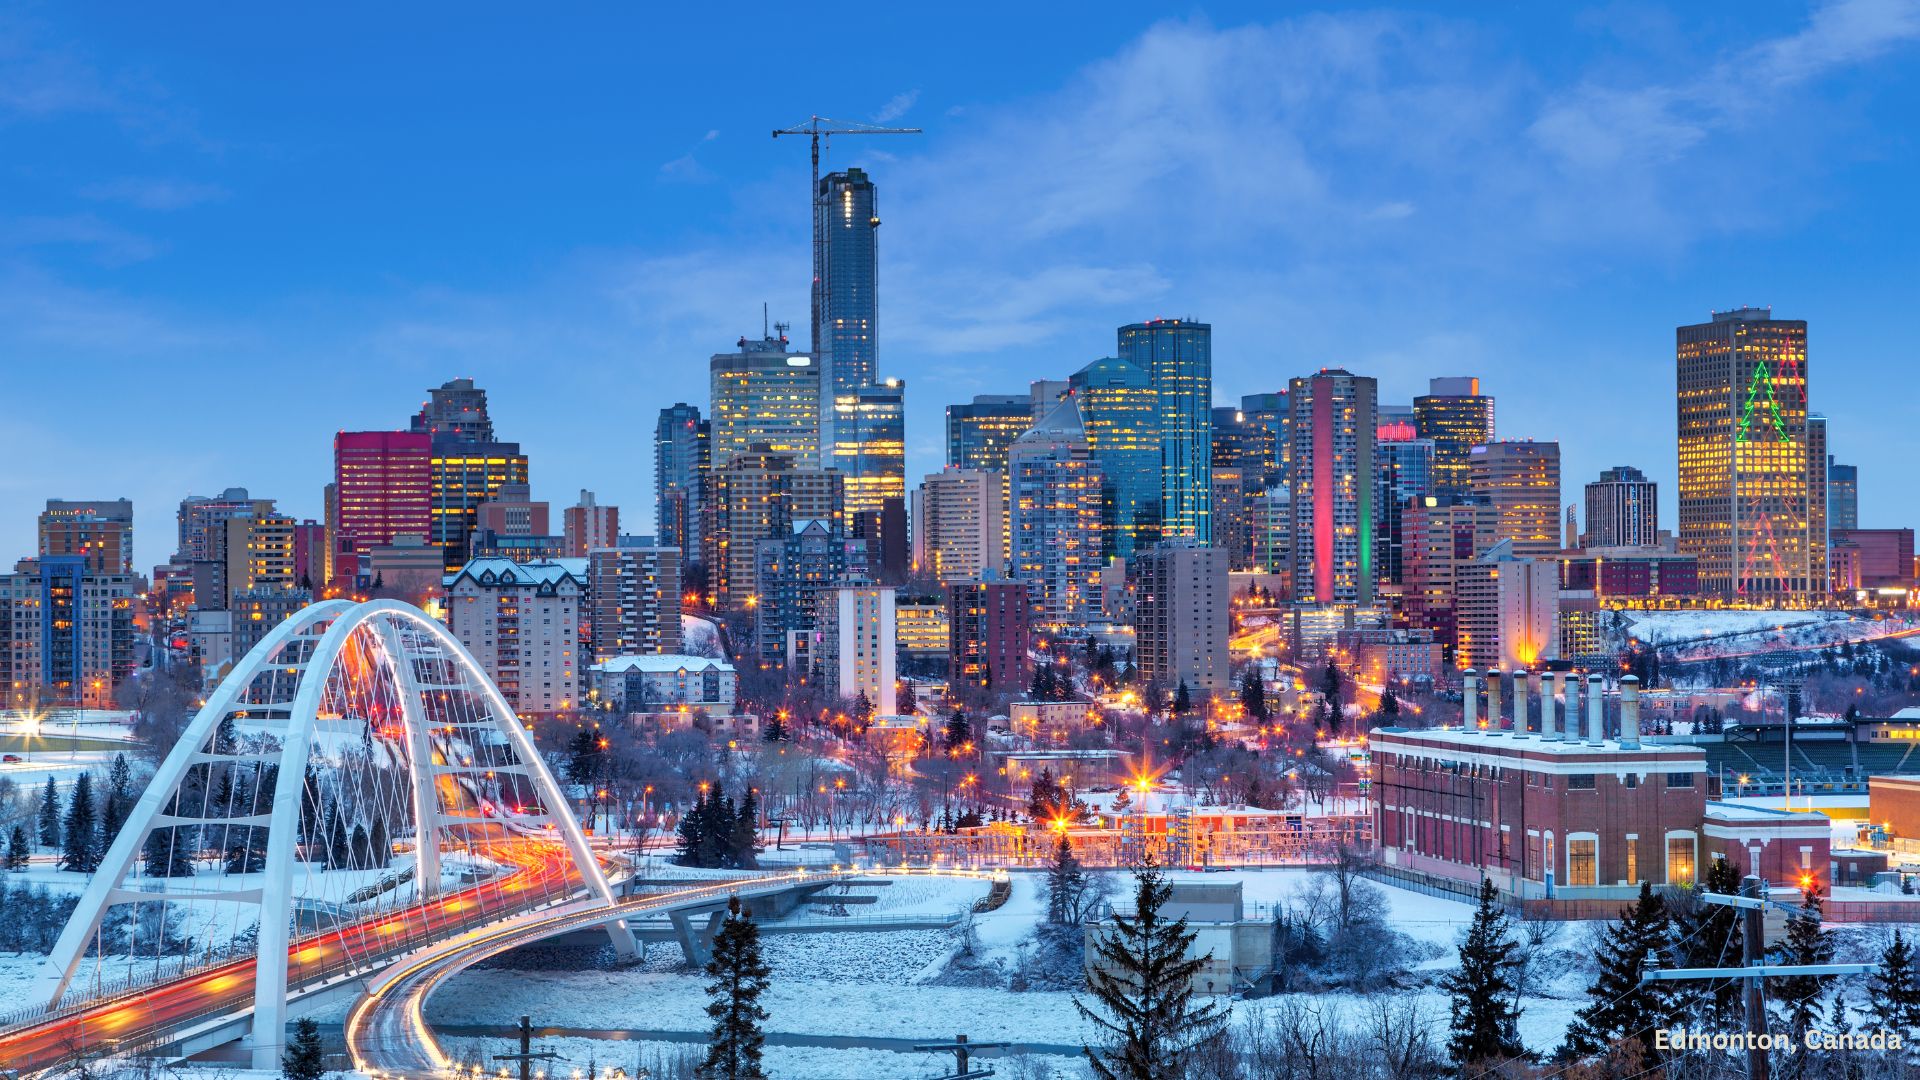 Edmonton, Canada - 10 Most Affordable Cities in the World for Housing